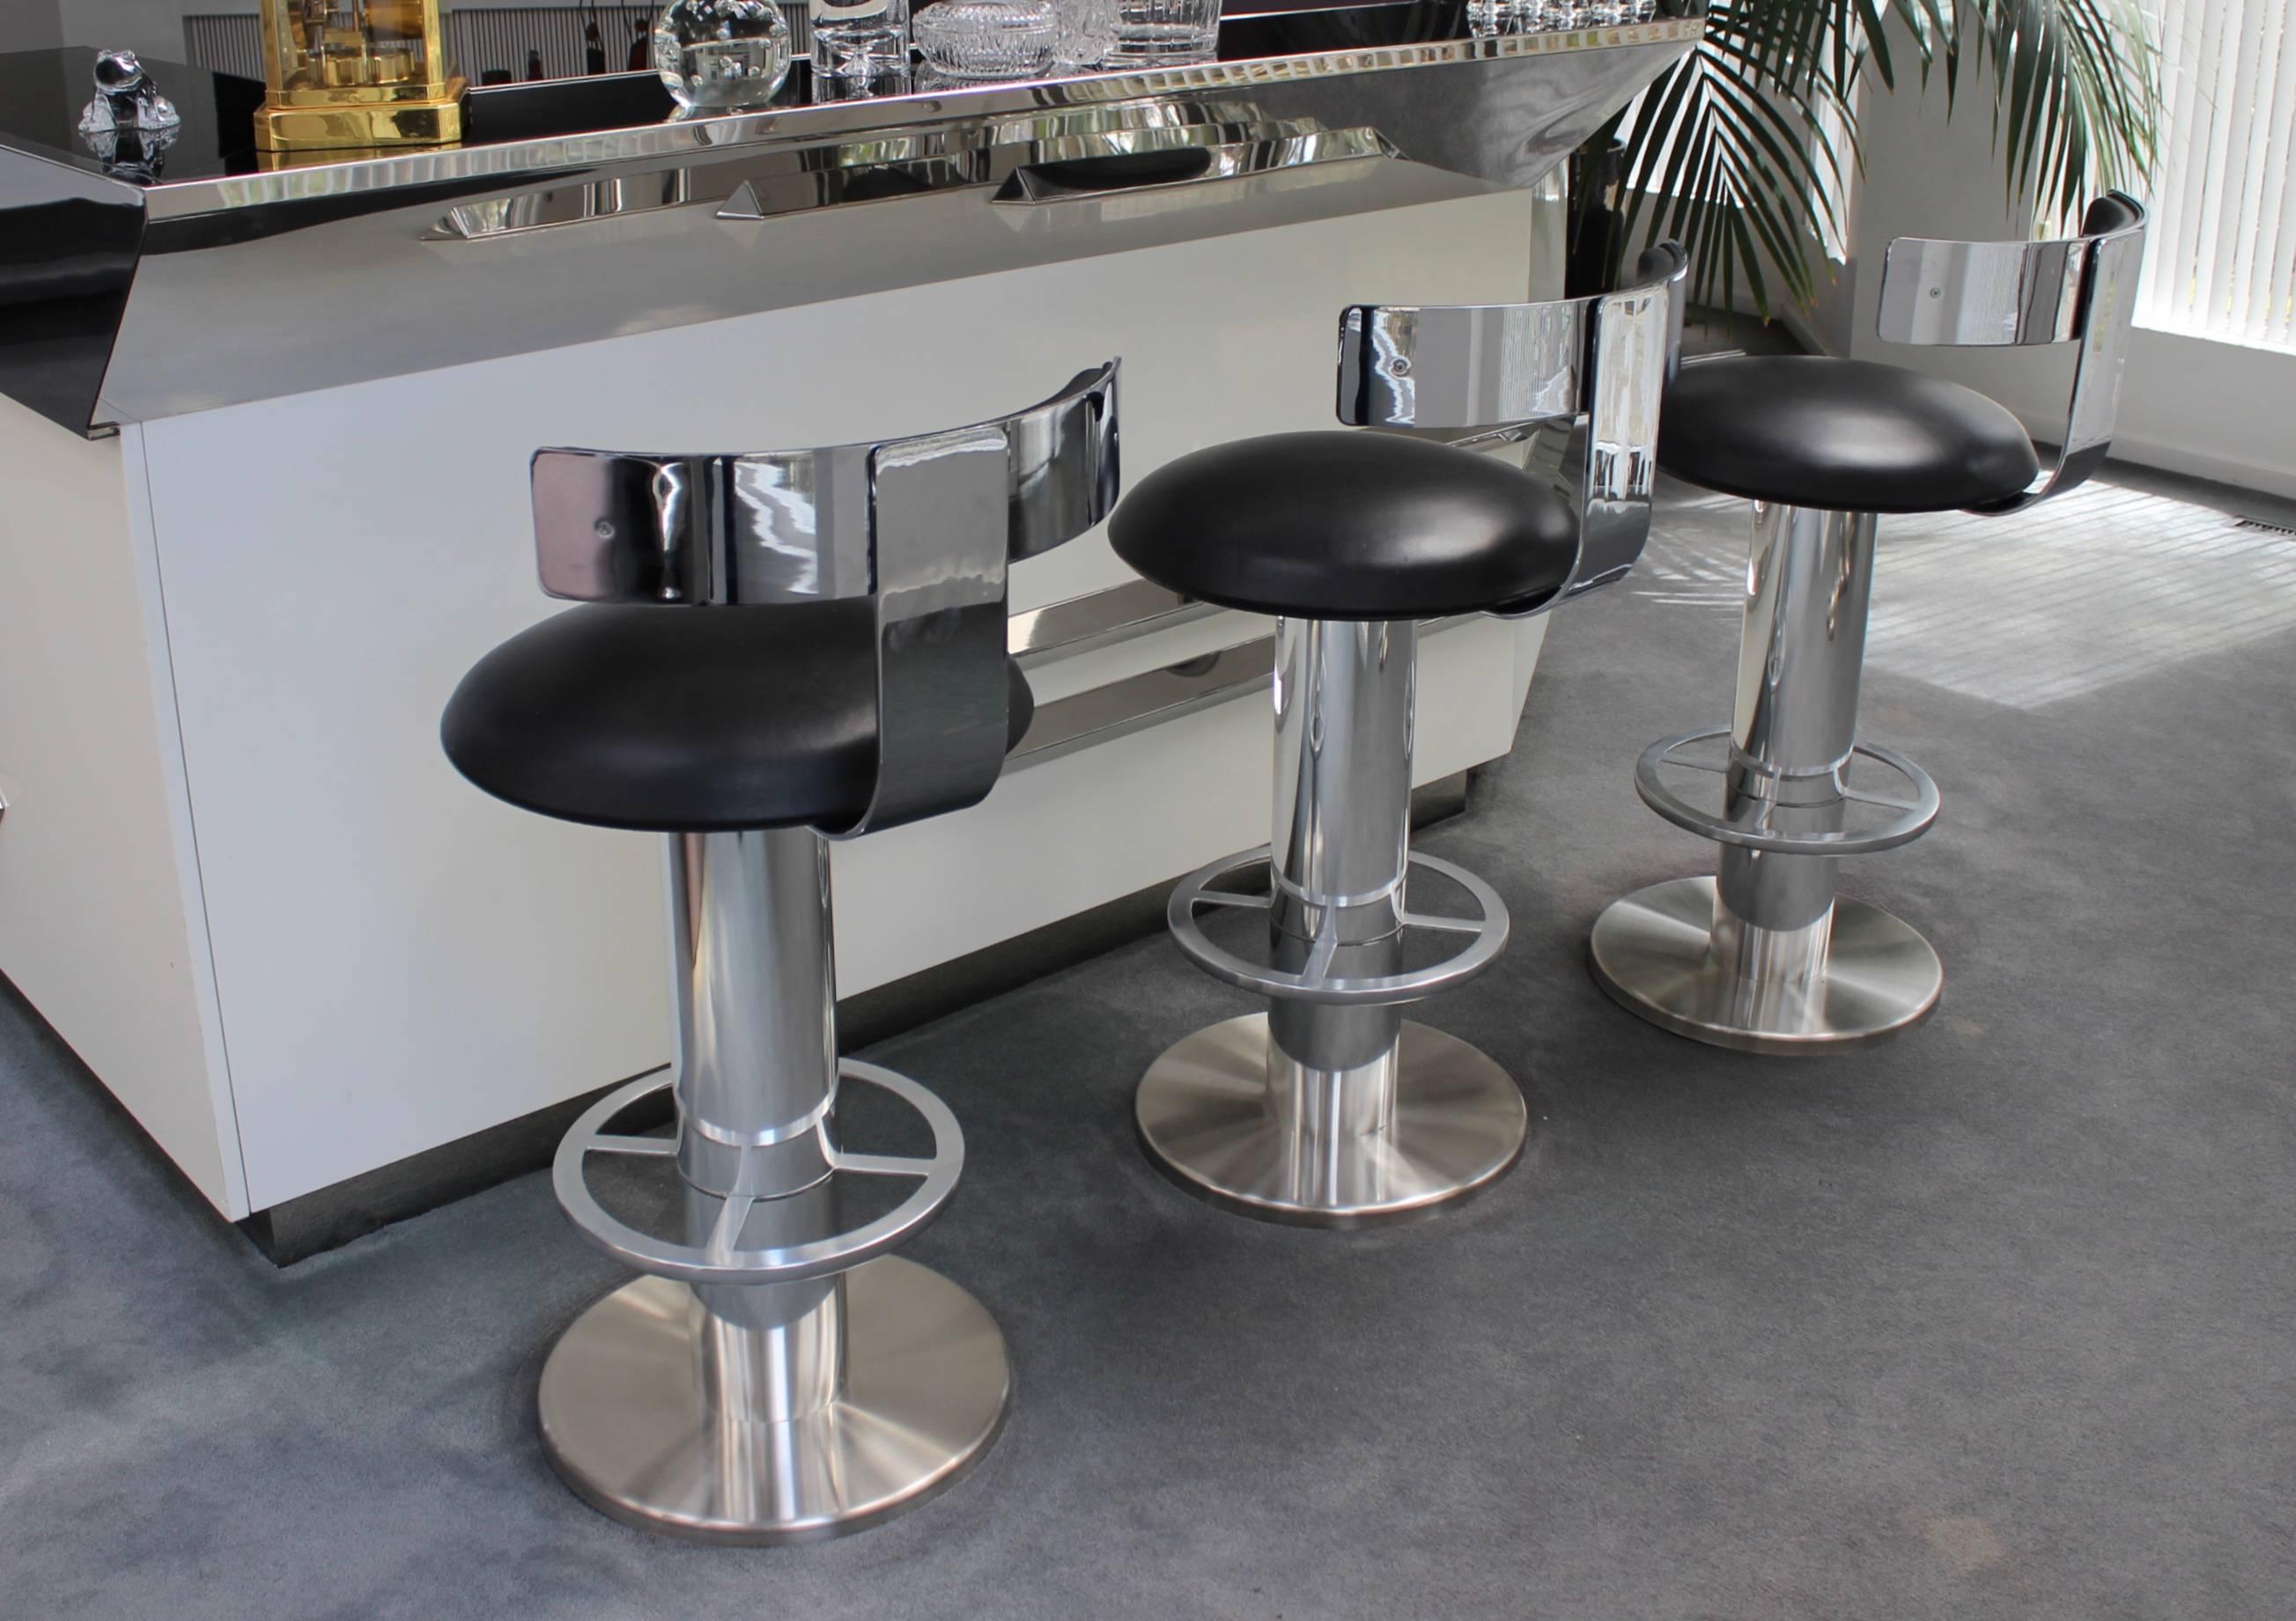 Stunning set of three 1980s designs for Leisure swivel bar stools. With chrome nickel-plated and steel and leather upholstery.